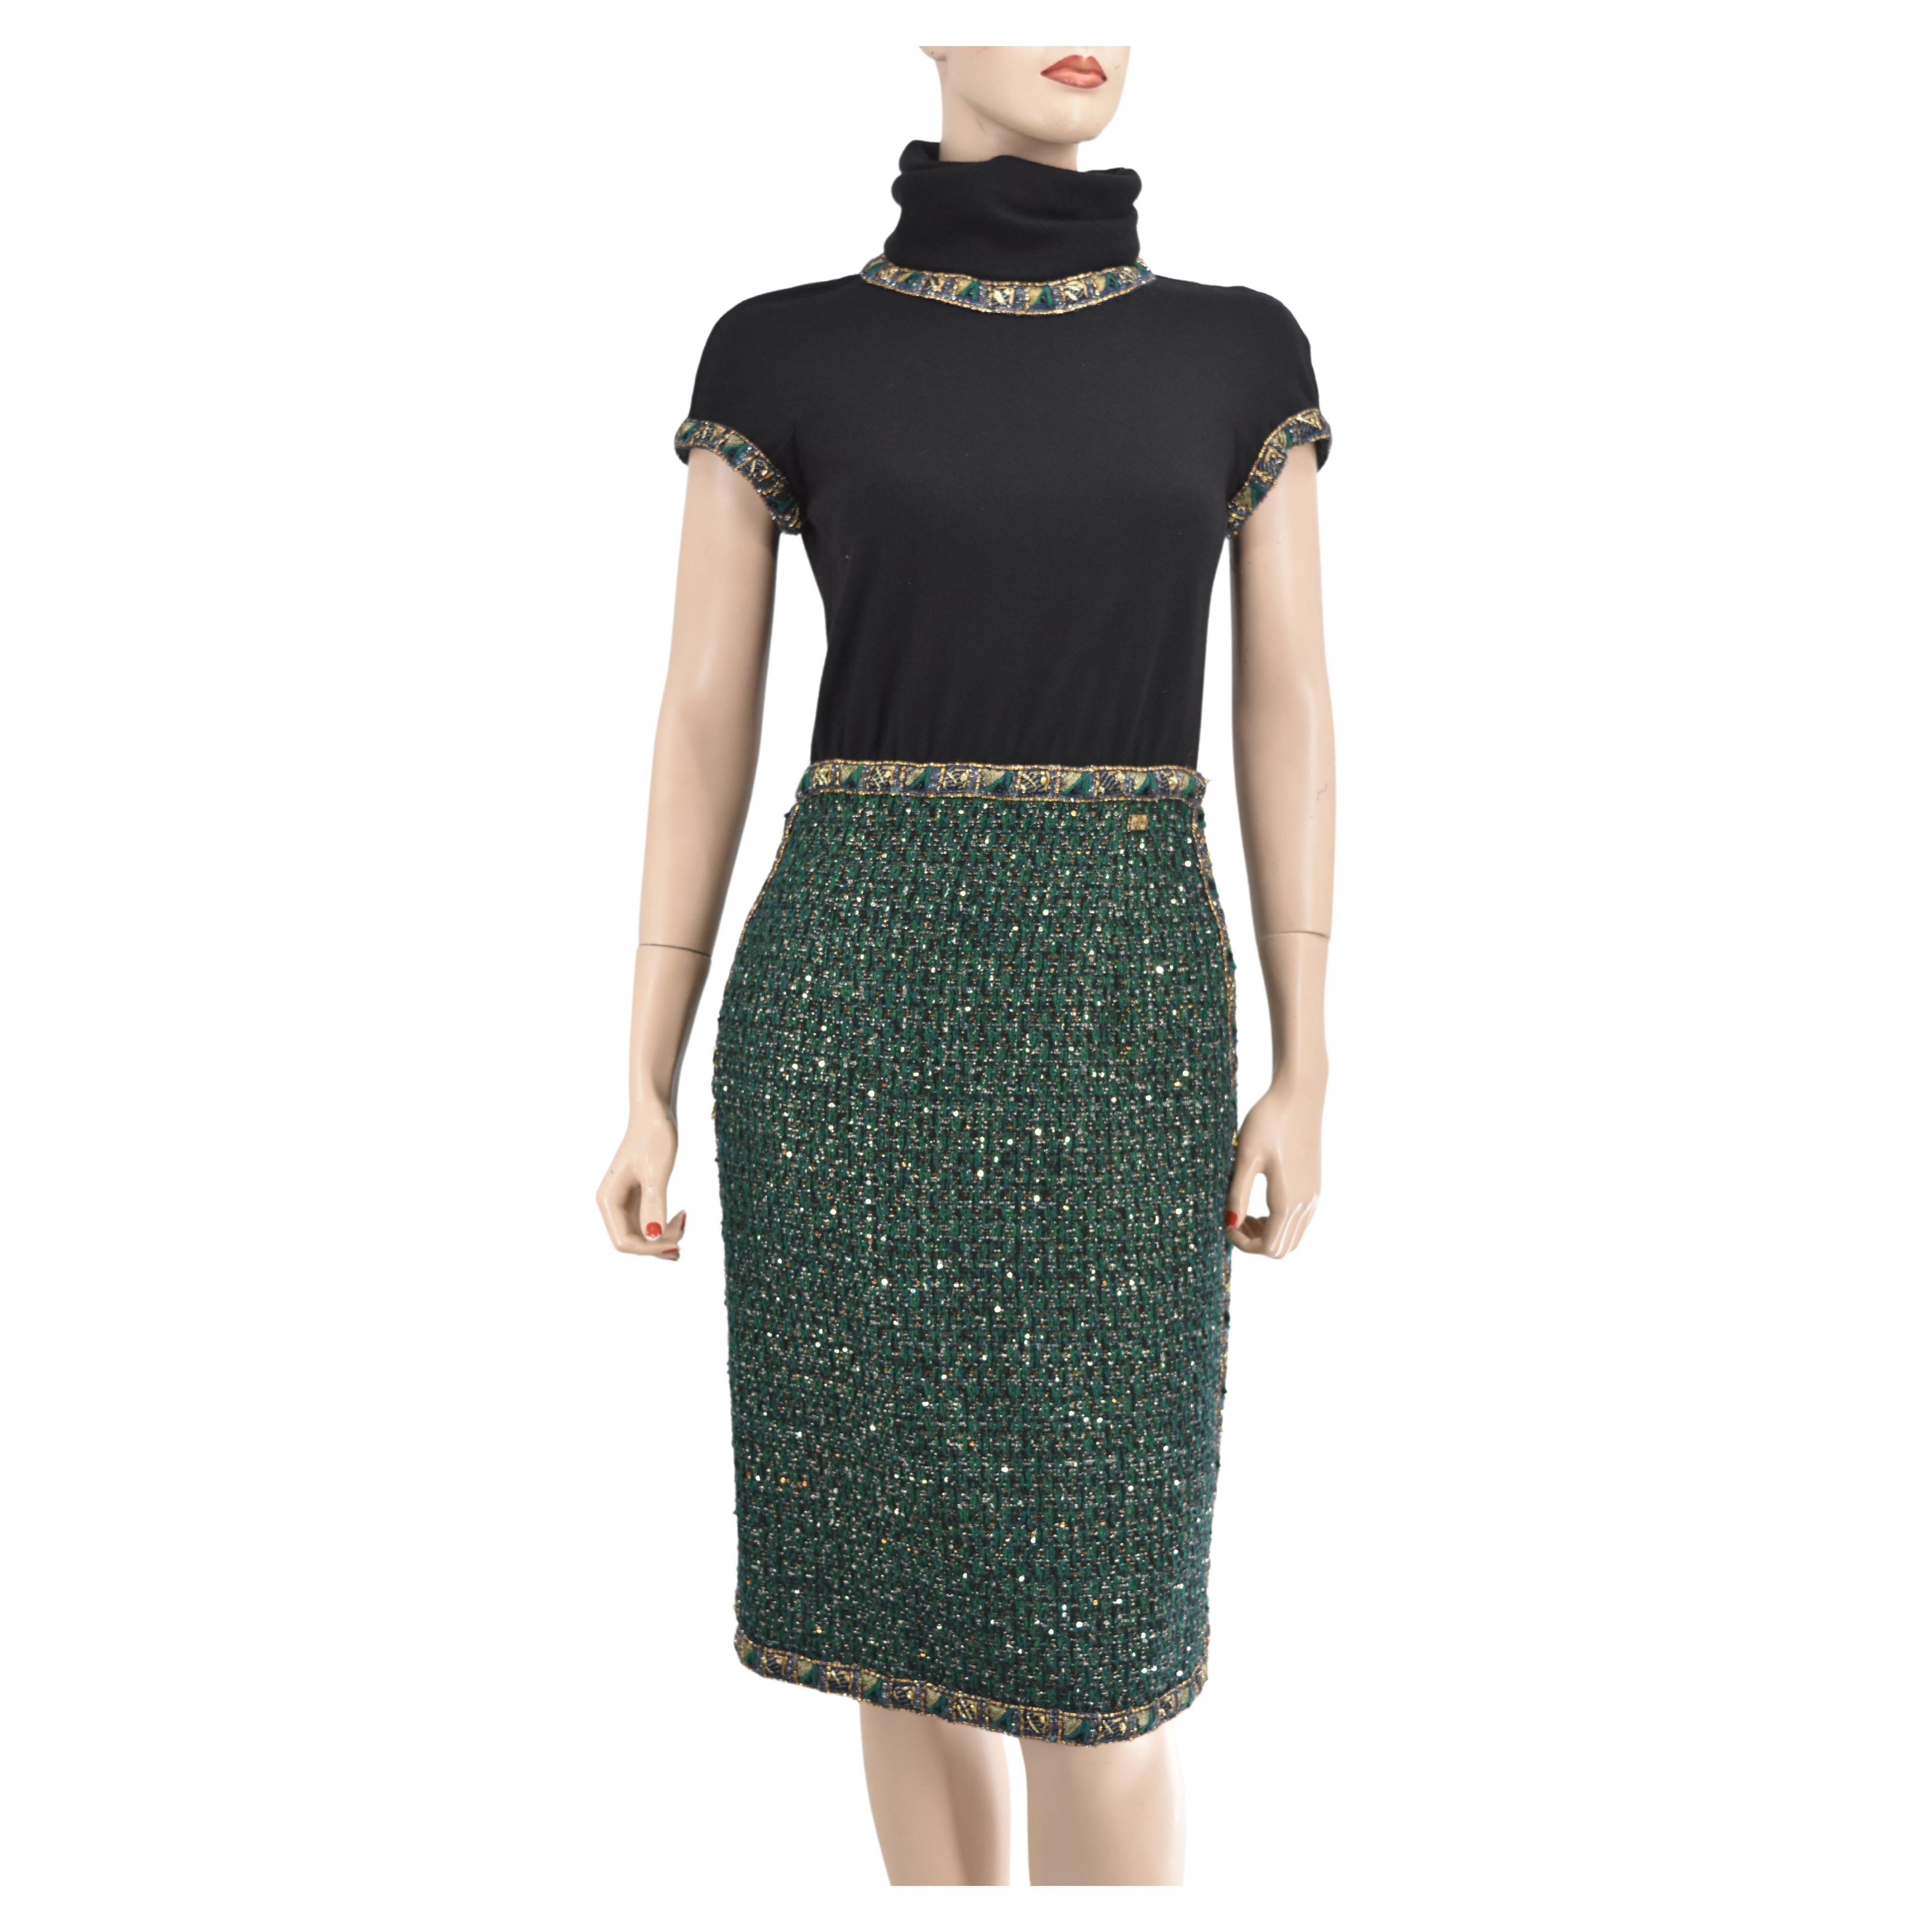 Chanel NWT 11A Fall 2011 Tweed Runway Dress 42 New For Sale